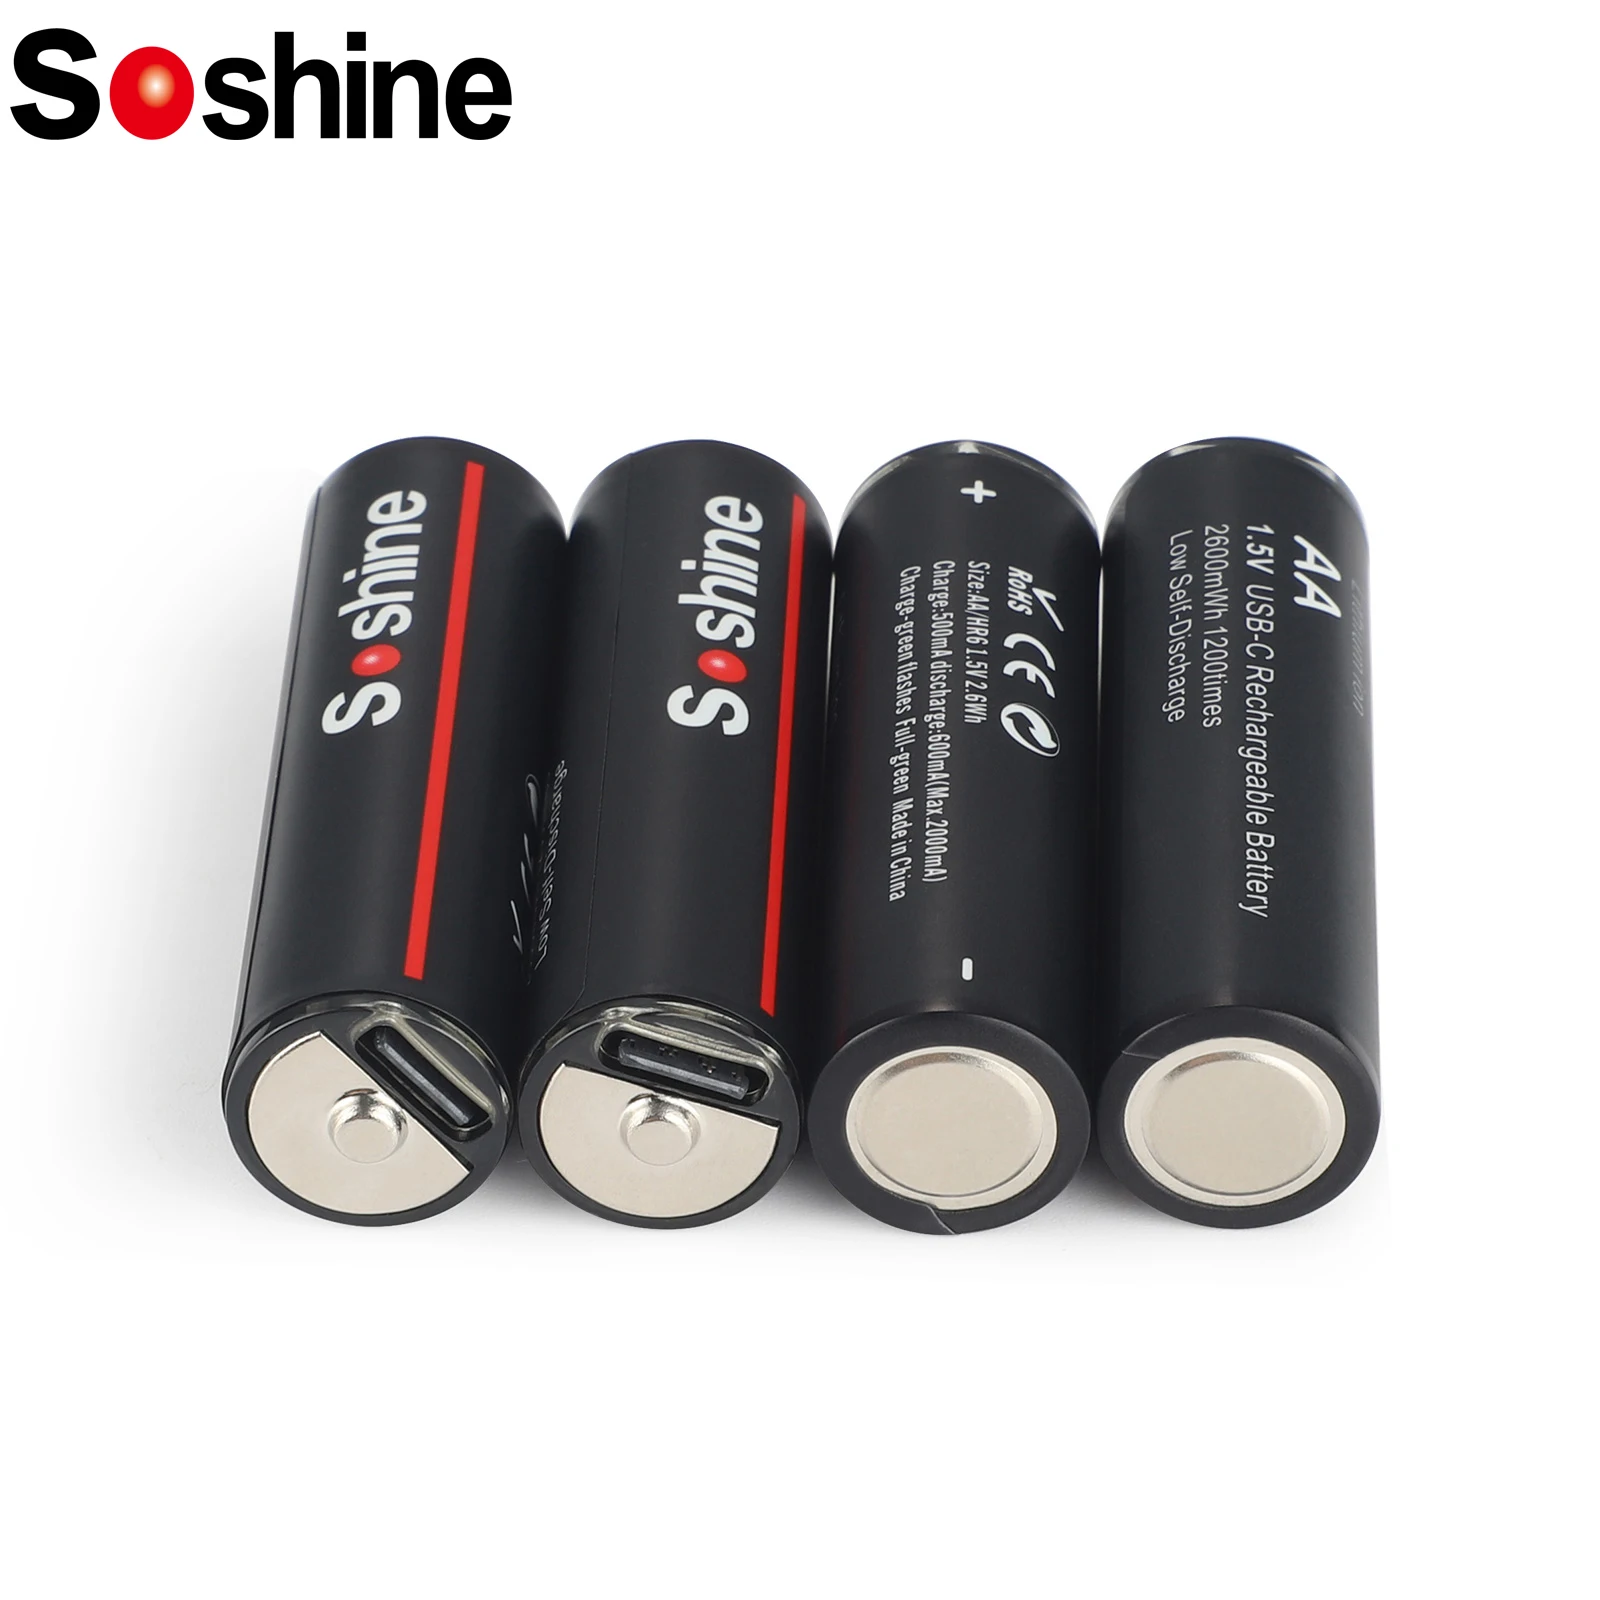 

Soshine 4/8/12PC AA 2600mWh Lithium Battery USB 1.5V 2A Li-Ion Rechargeable Battery for Massager Smoke Detector Metal Intercom